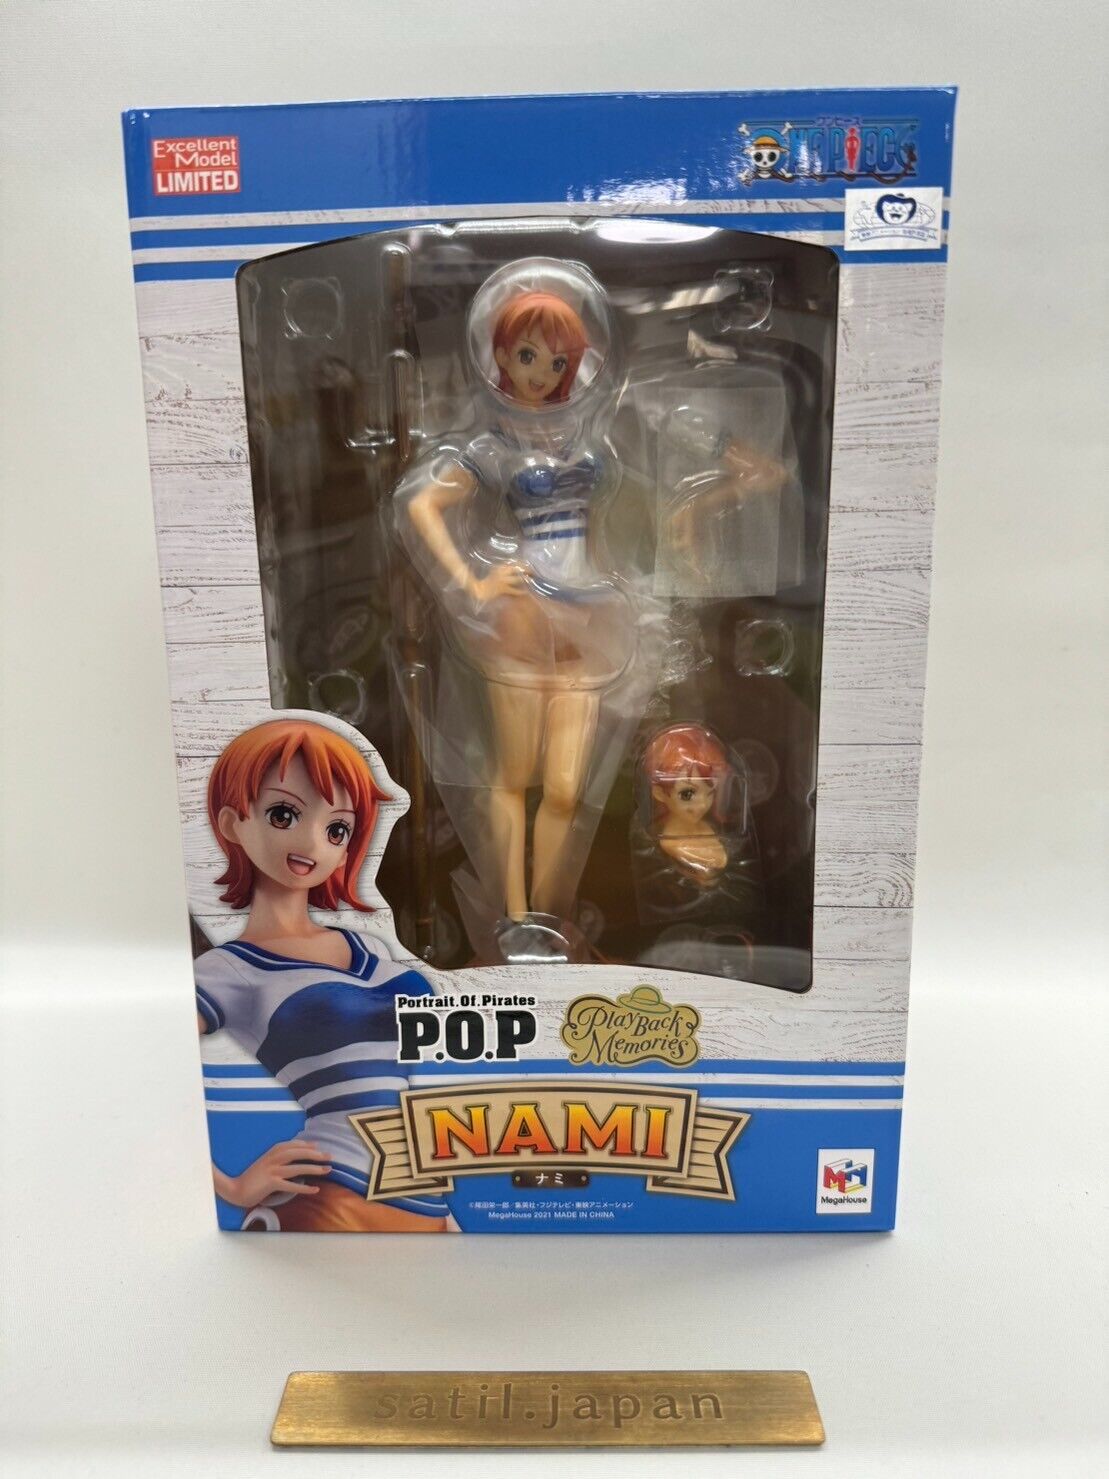 [USED] MegaHouse One Piece Portrait.Of.Pirates Nami Playback Memories Figure